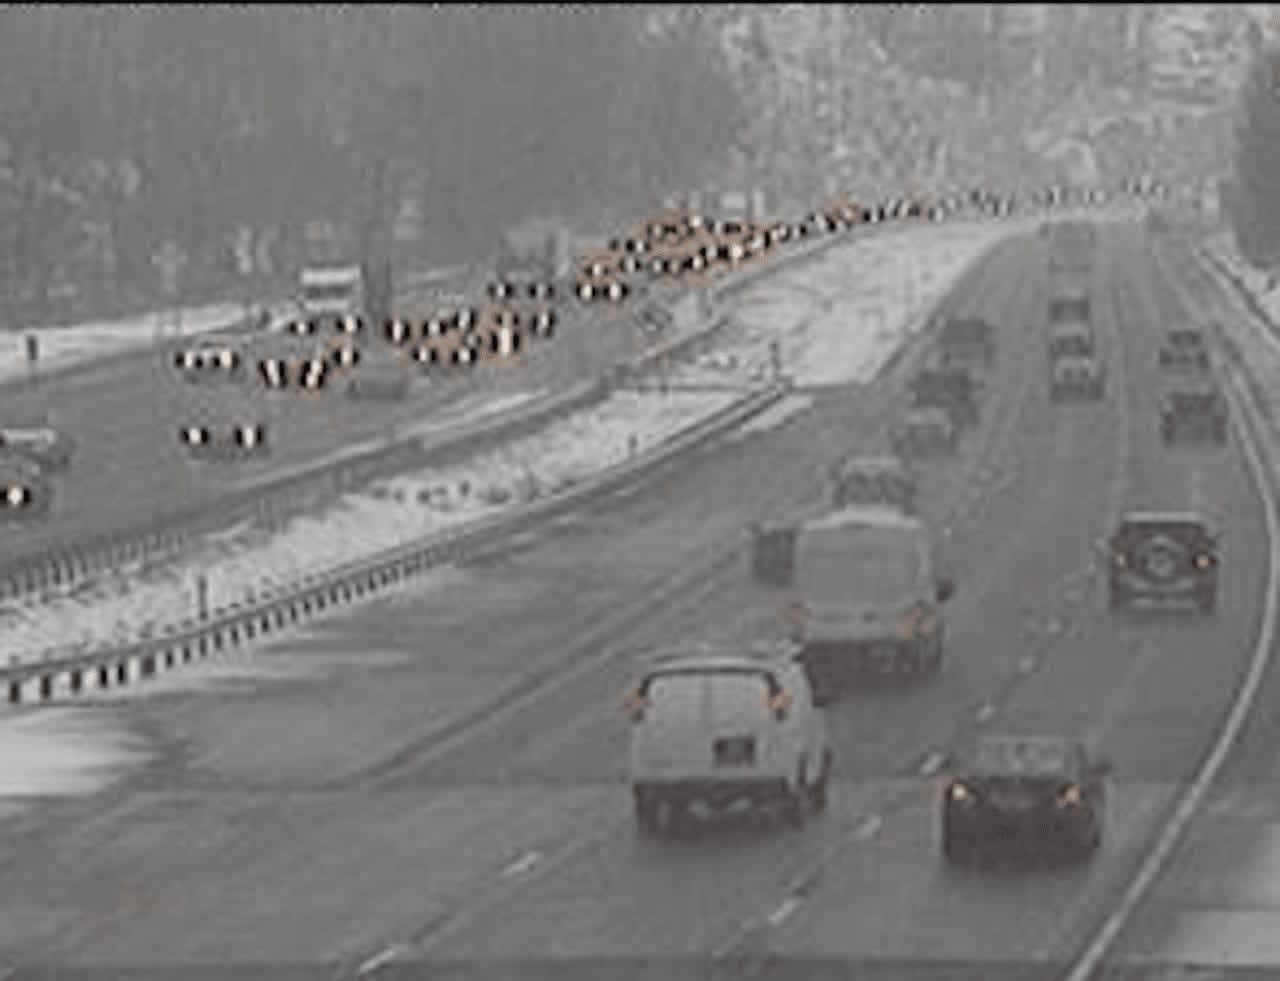 A look at conditions on I-87 in Rockland just after 4 p.m. Tuesday.